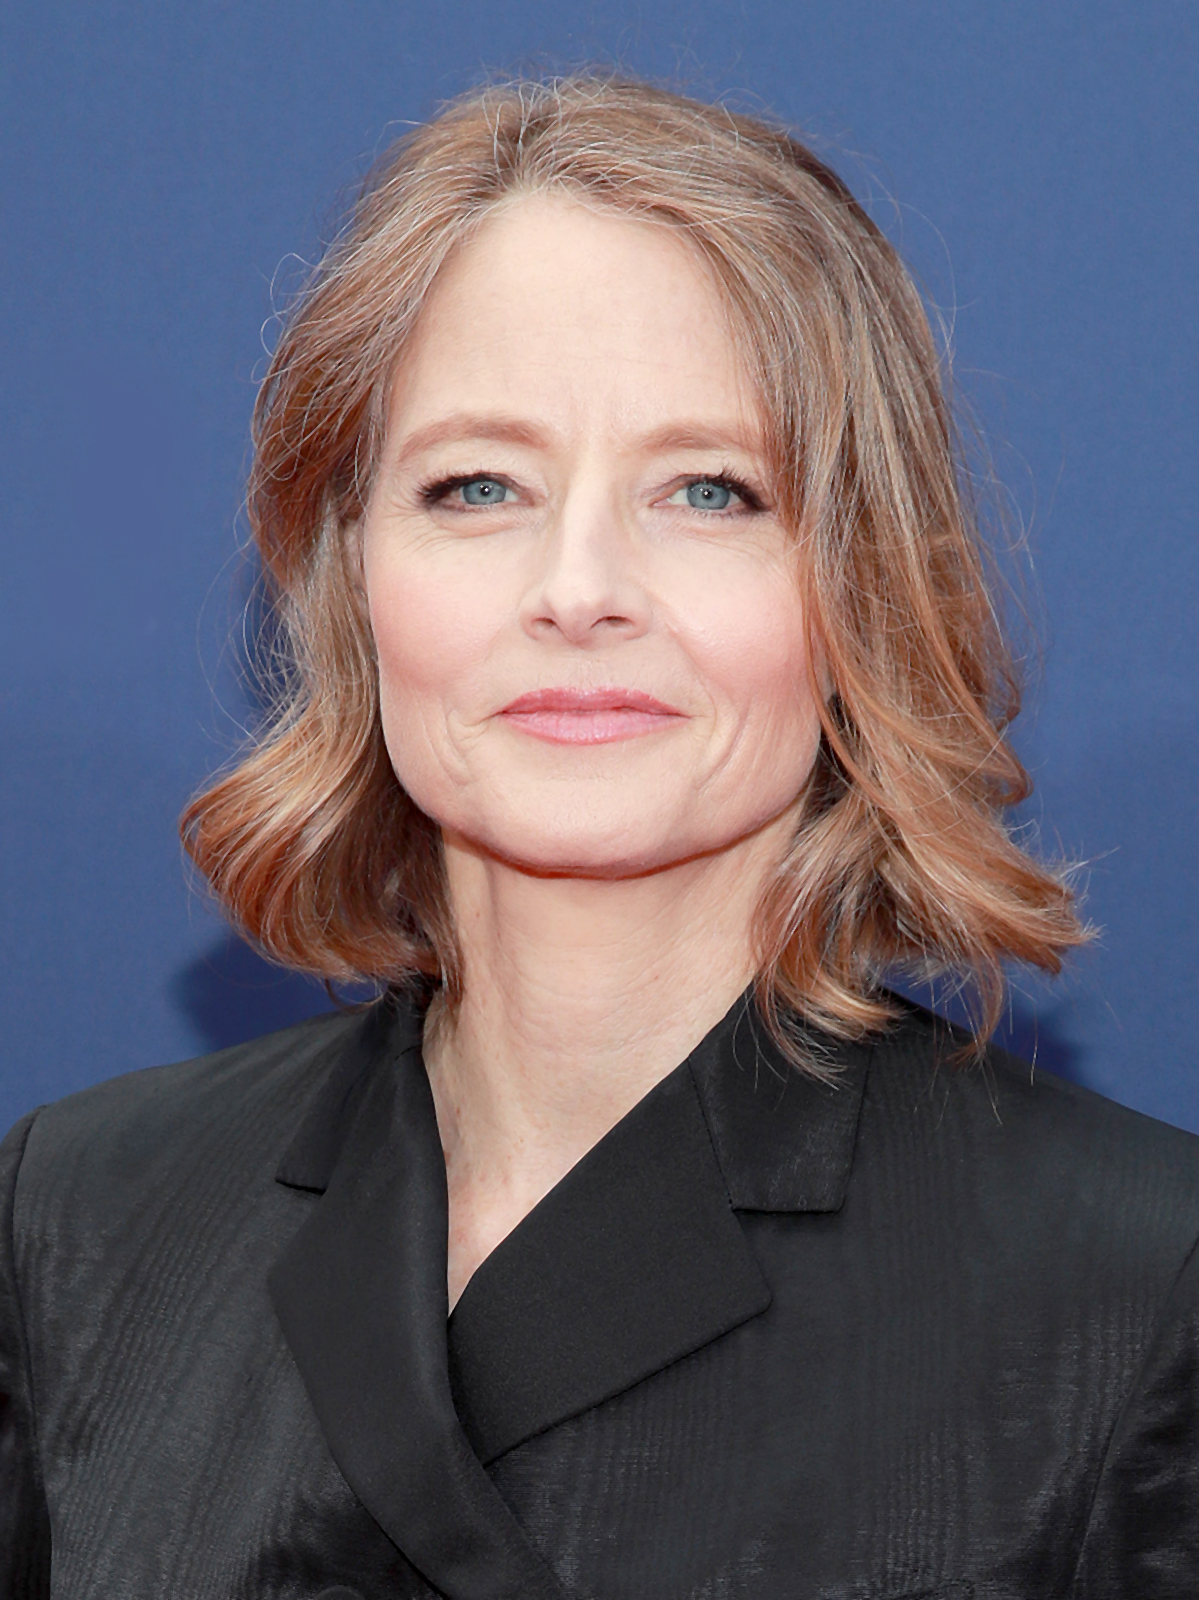 Nominee Profile 2021: Jodie Foster, “The Mauritanian” - Golden Globes